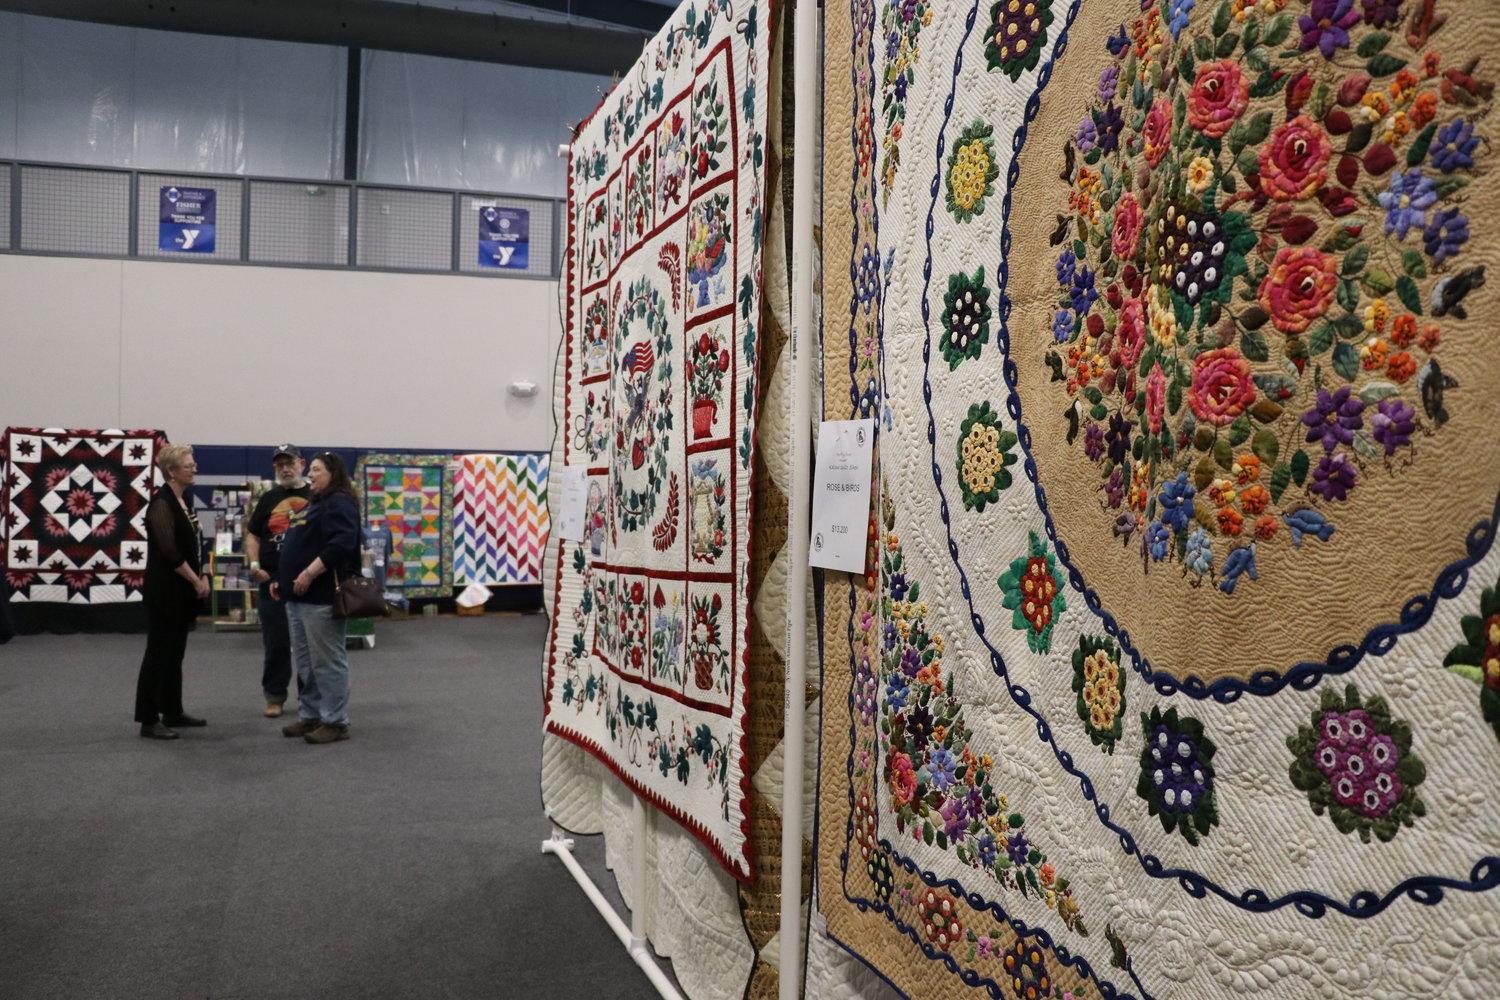 This quilt to the right was selling for $13,200 and the quilt on the right for $5,500 at the Kalona Quilt Show & Sale on April 28-30.